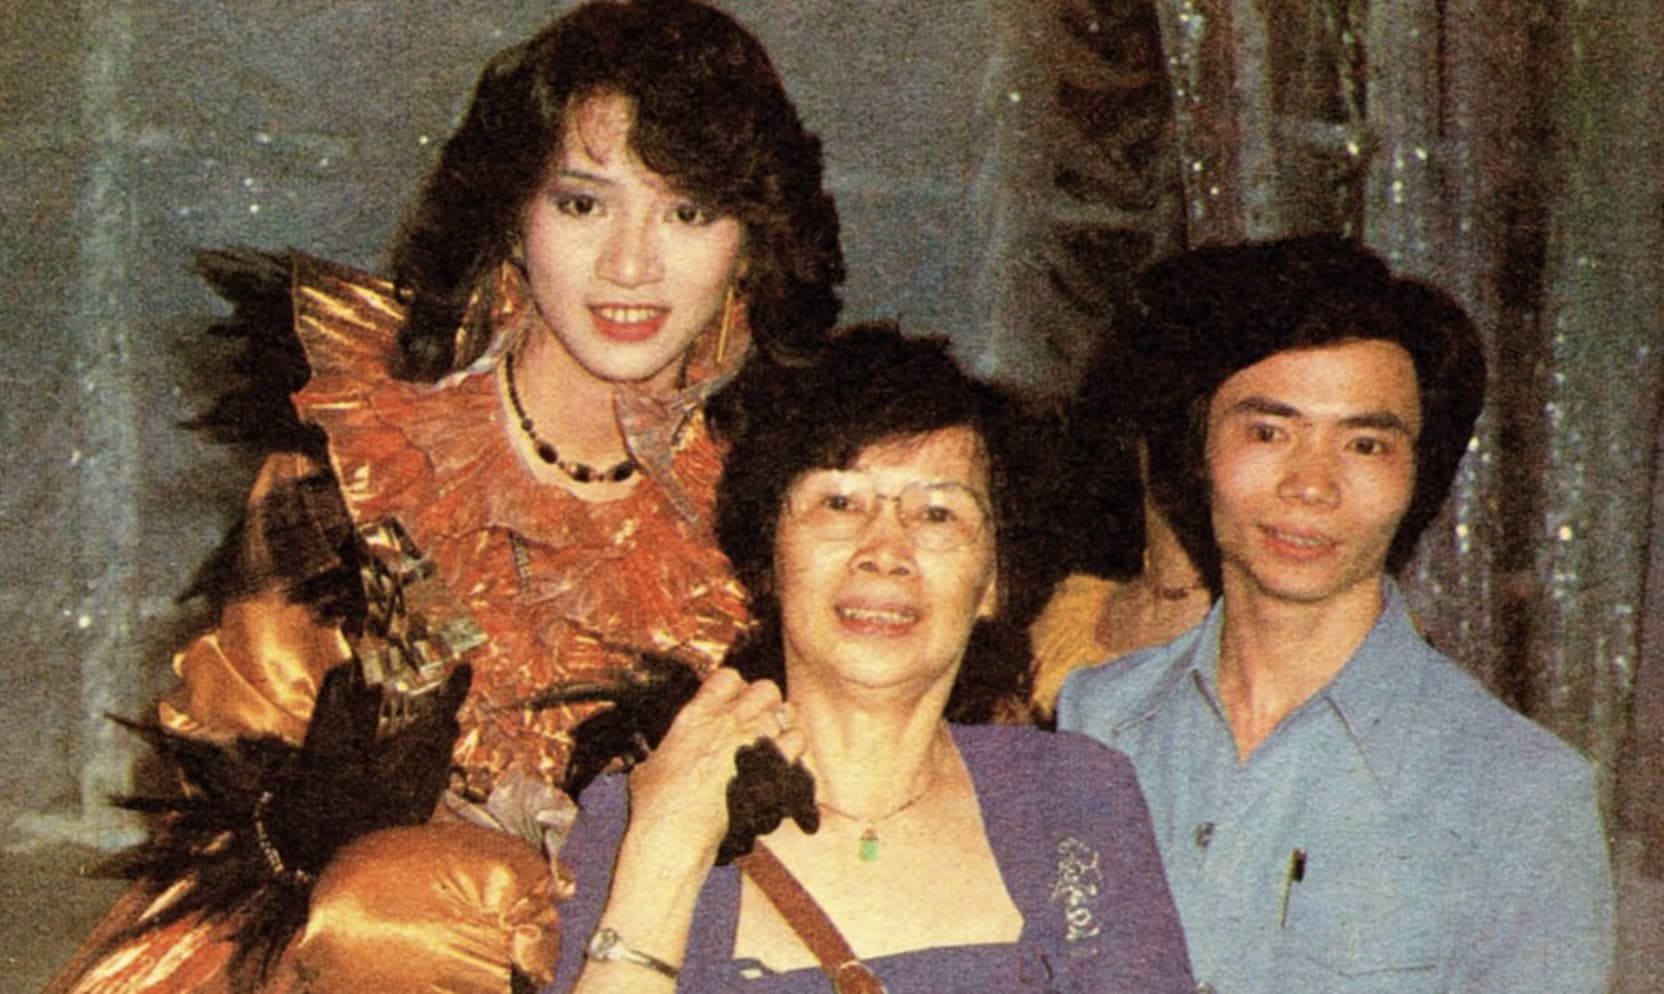 “Lightning Will Not Strike Me”: Anita Mui’s Brother After Saying ...